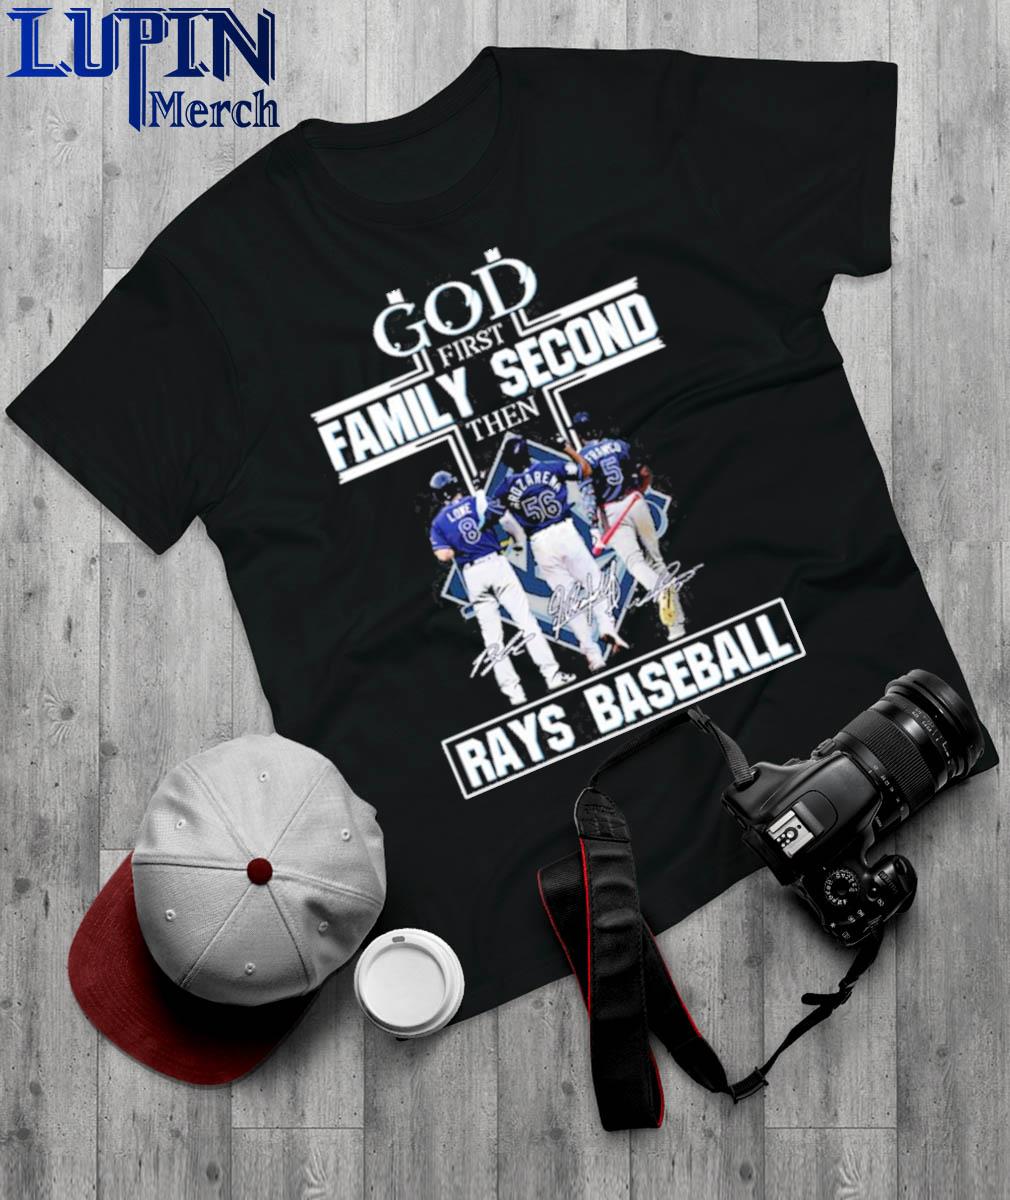 God first family second then Tampa Bay Rays baseball 2023 shirt, hoodie,  longsleeve tee, sweater